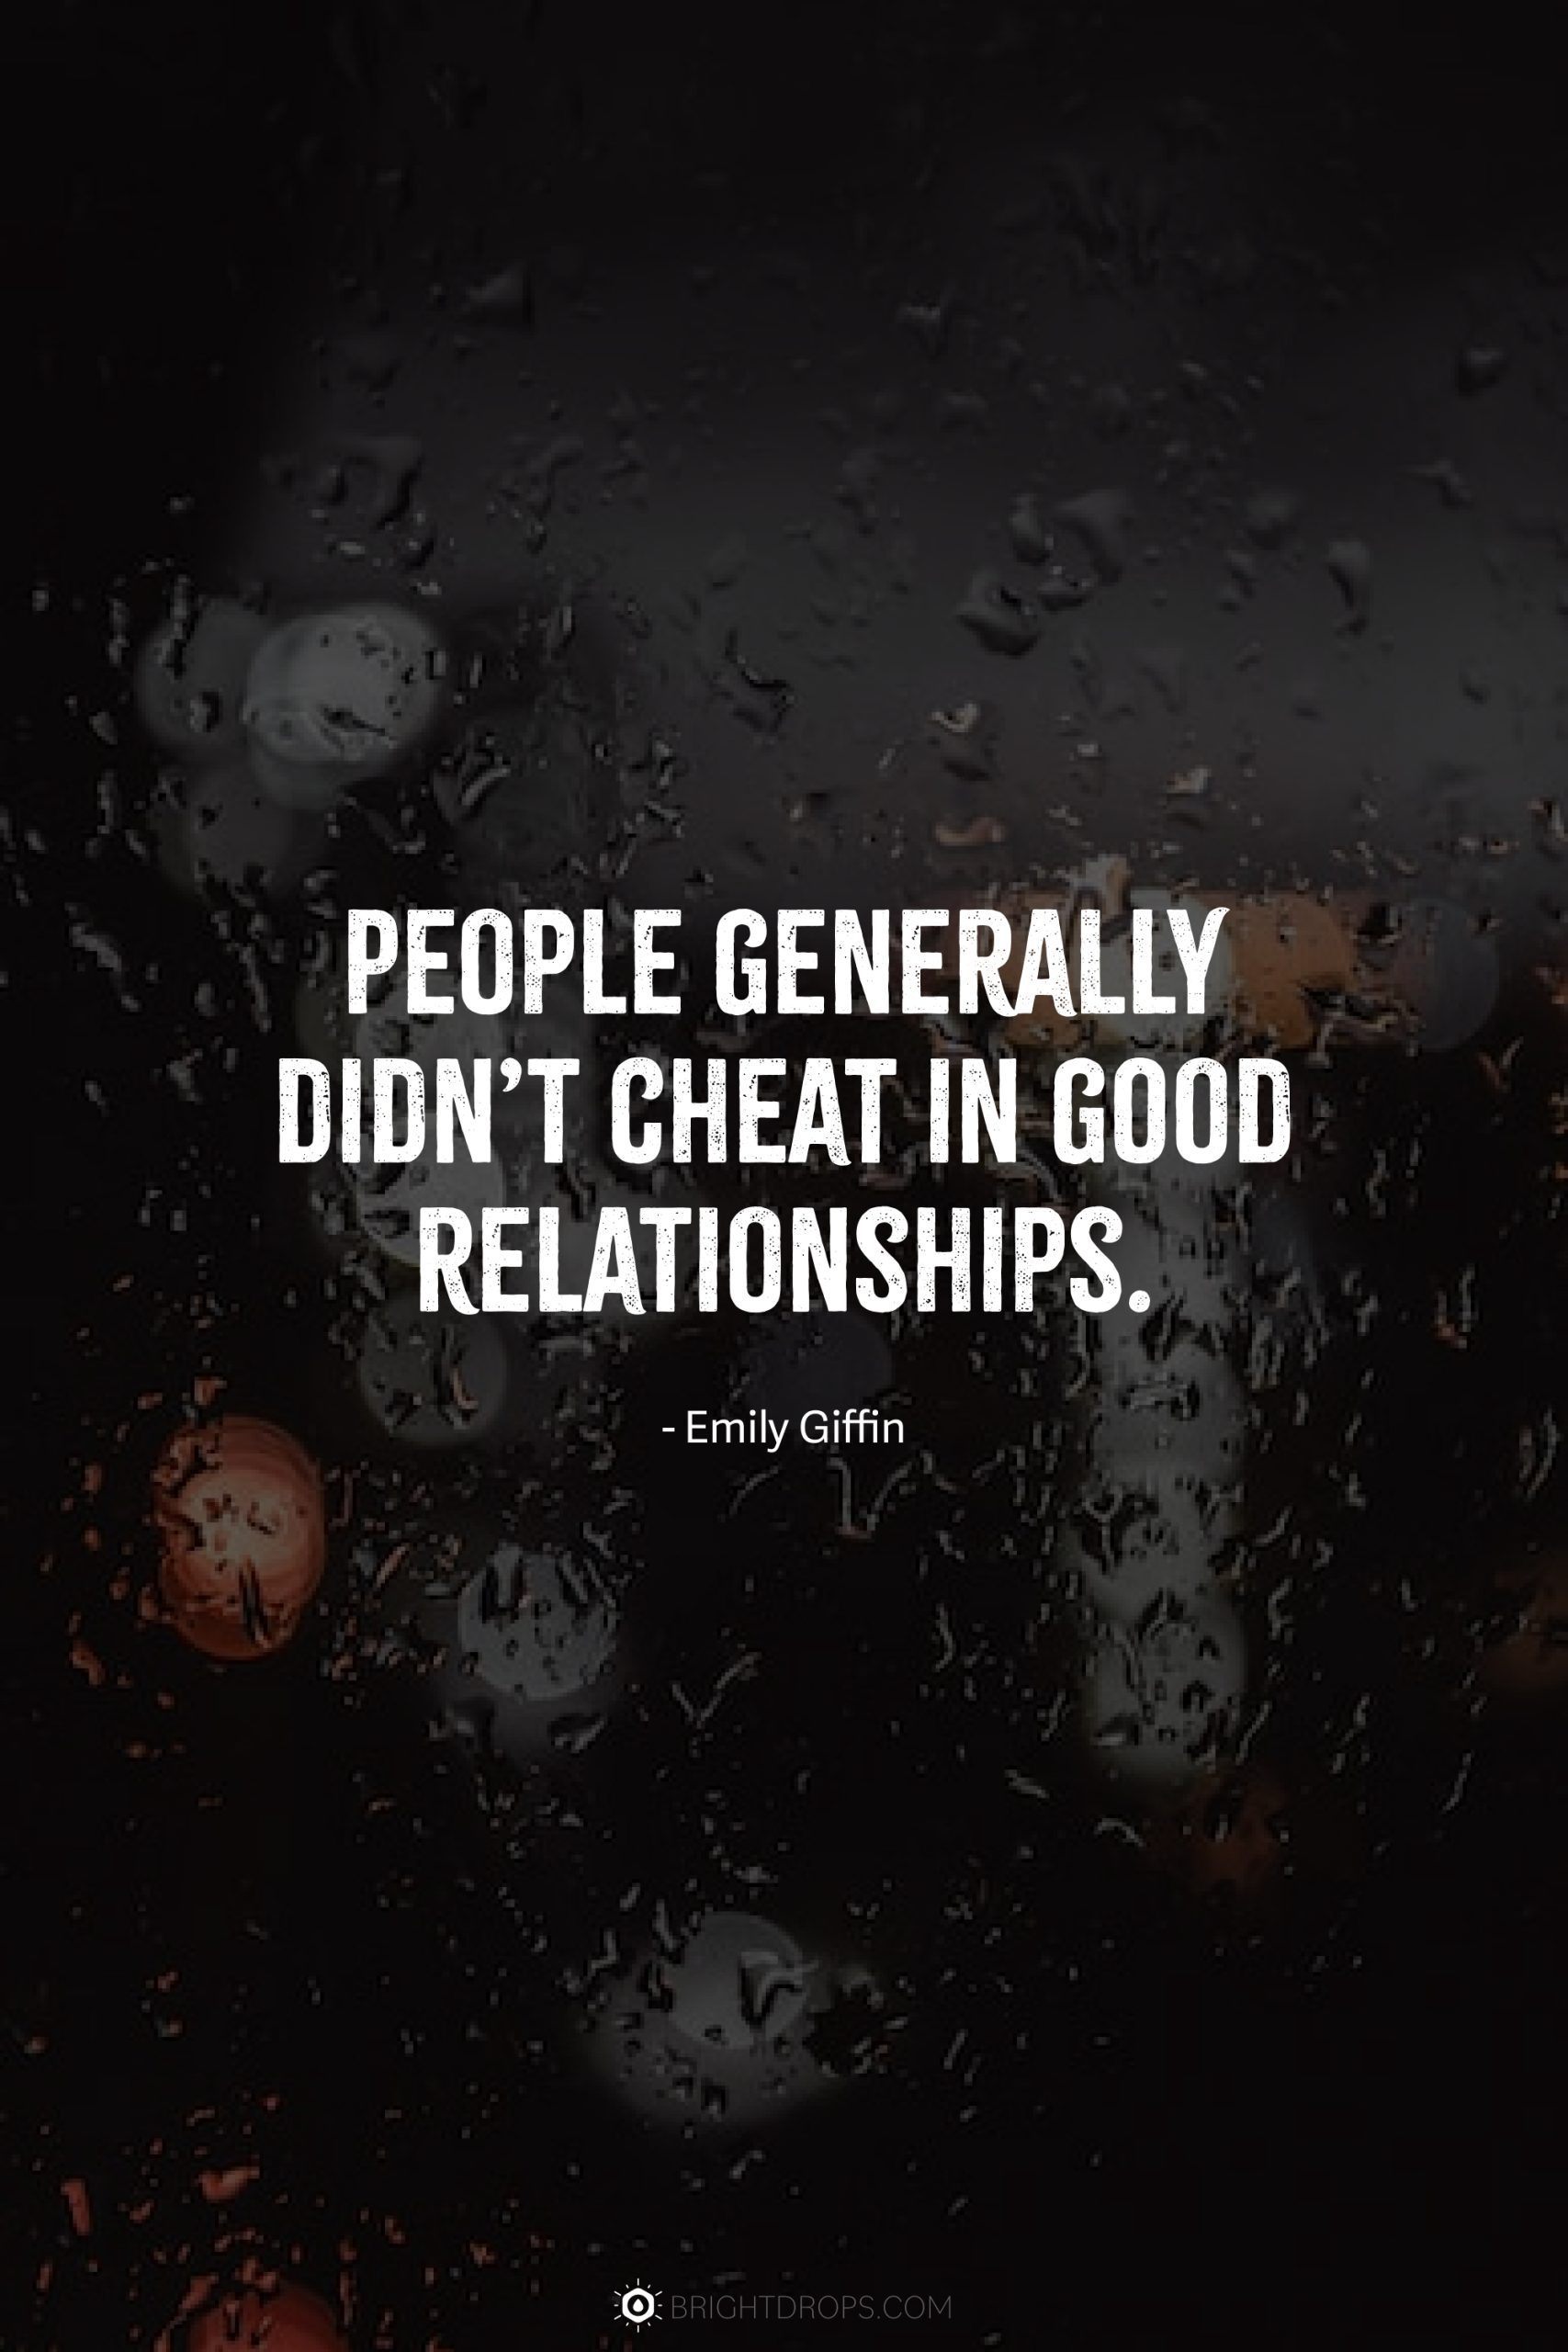 People generally didn’t cheat in good relationships.